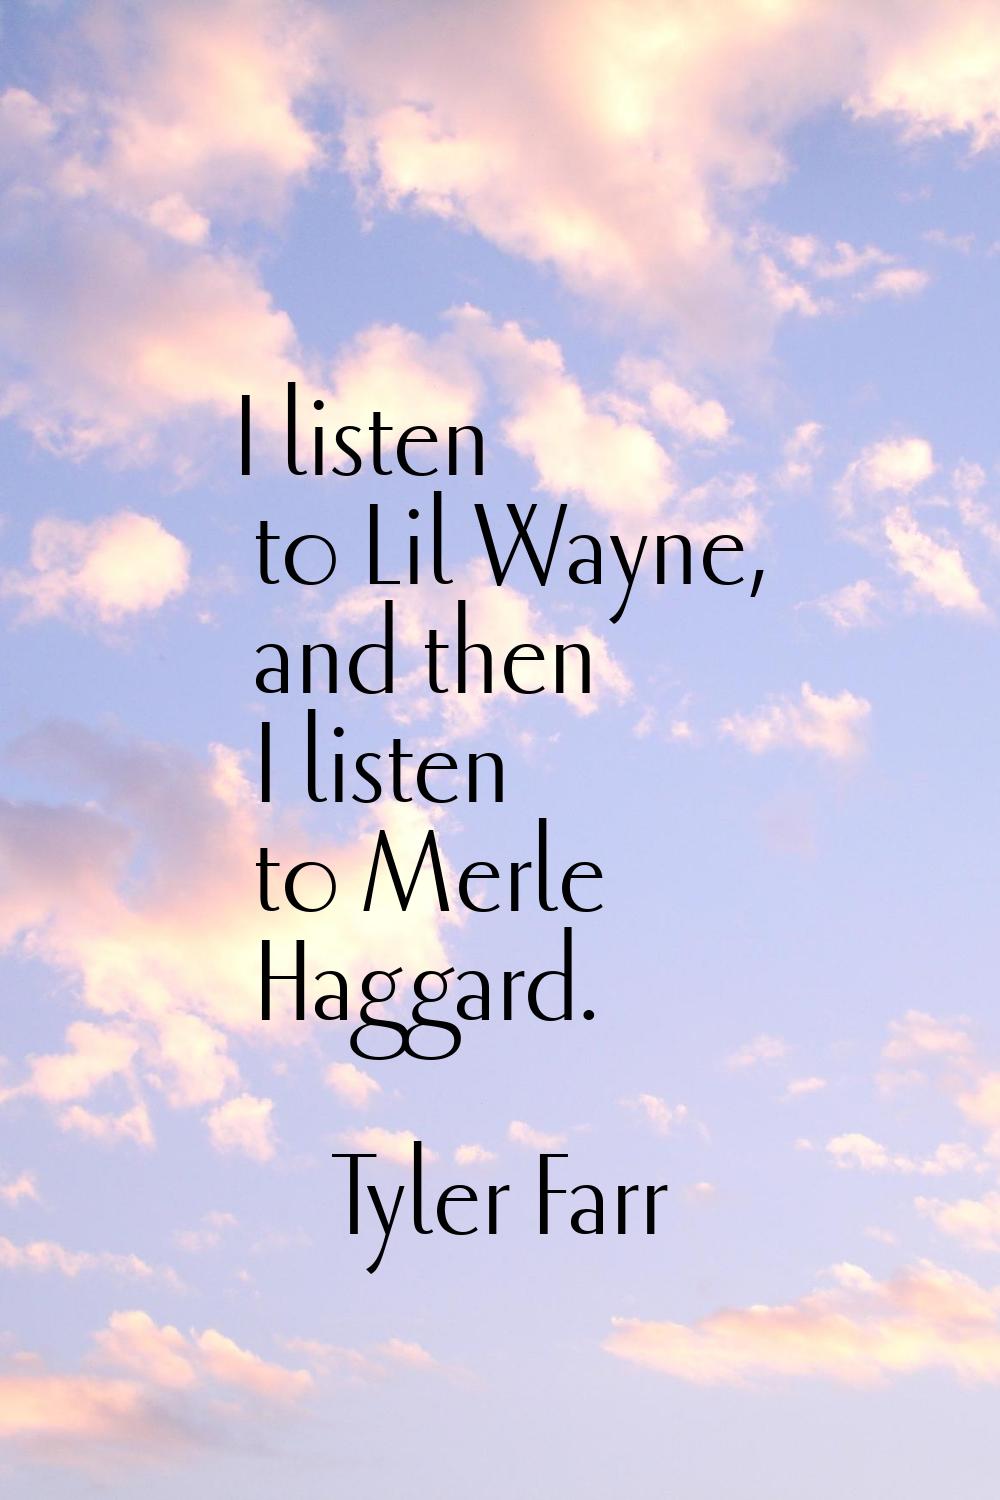 I listen to Lil Wayne, and then I listen to Merle Haggard.